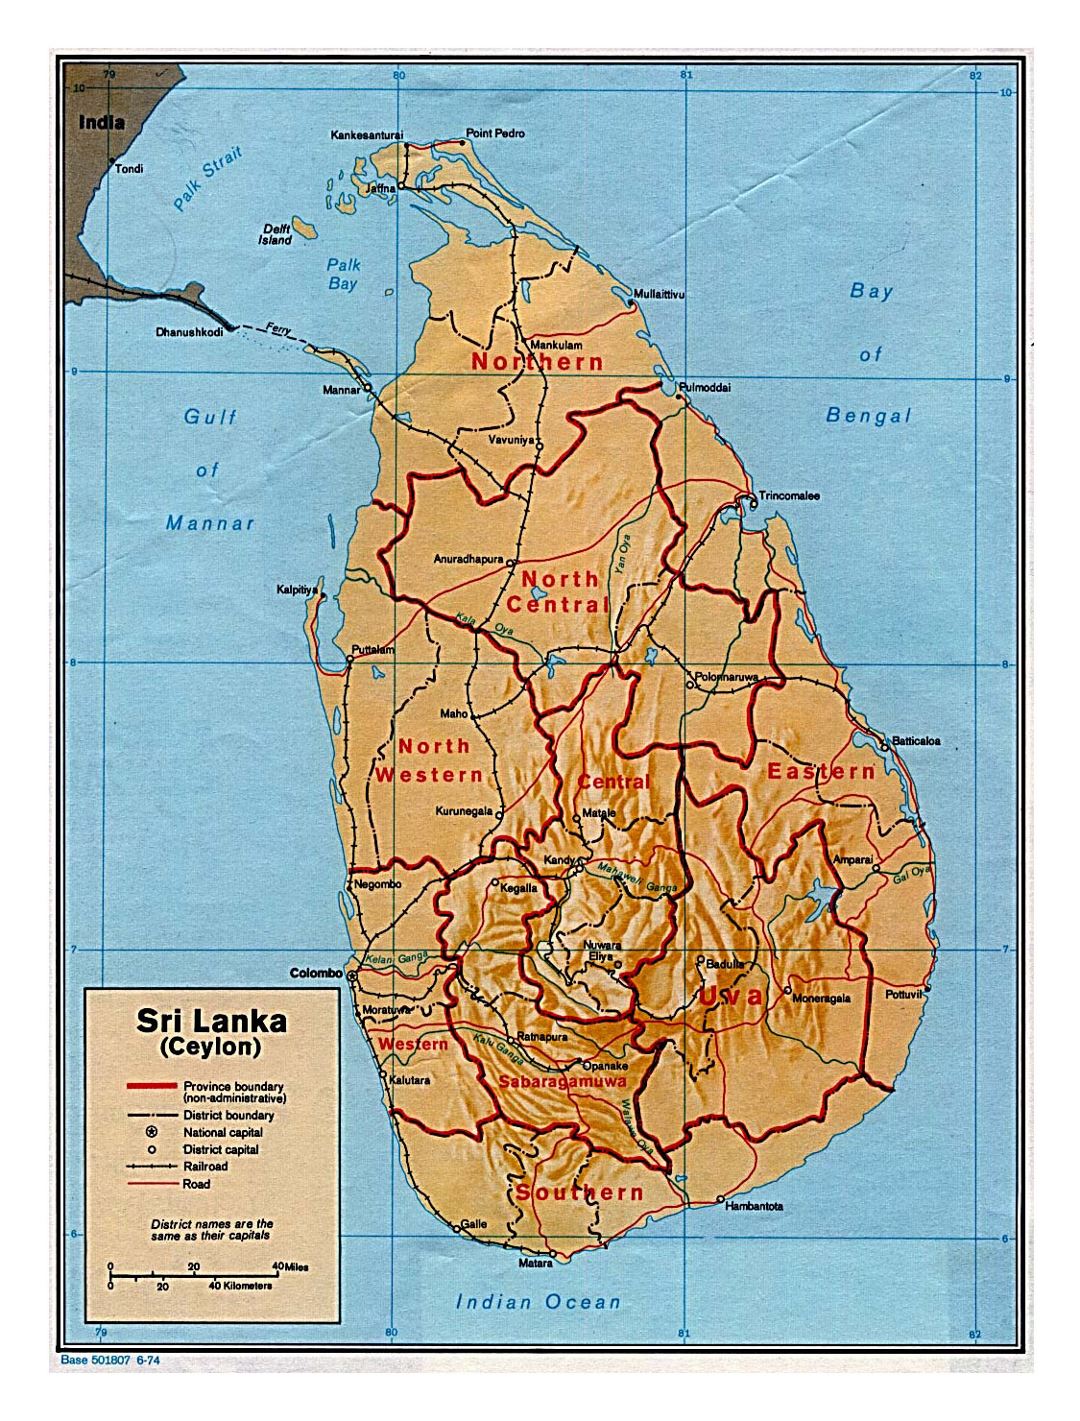 Detailed political and administrative map of Sri Lanka with relief, roads, railroads and major cities - 1974